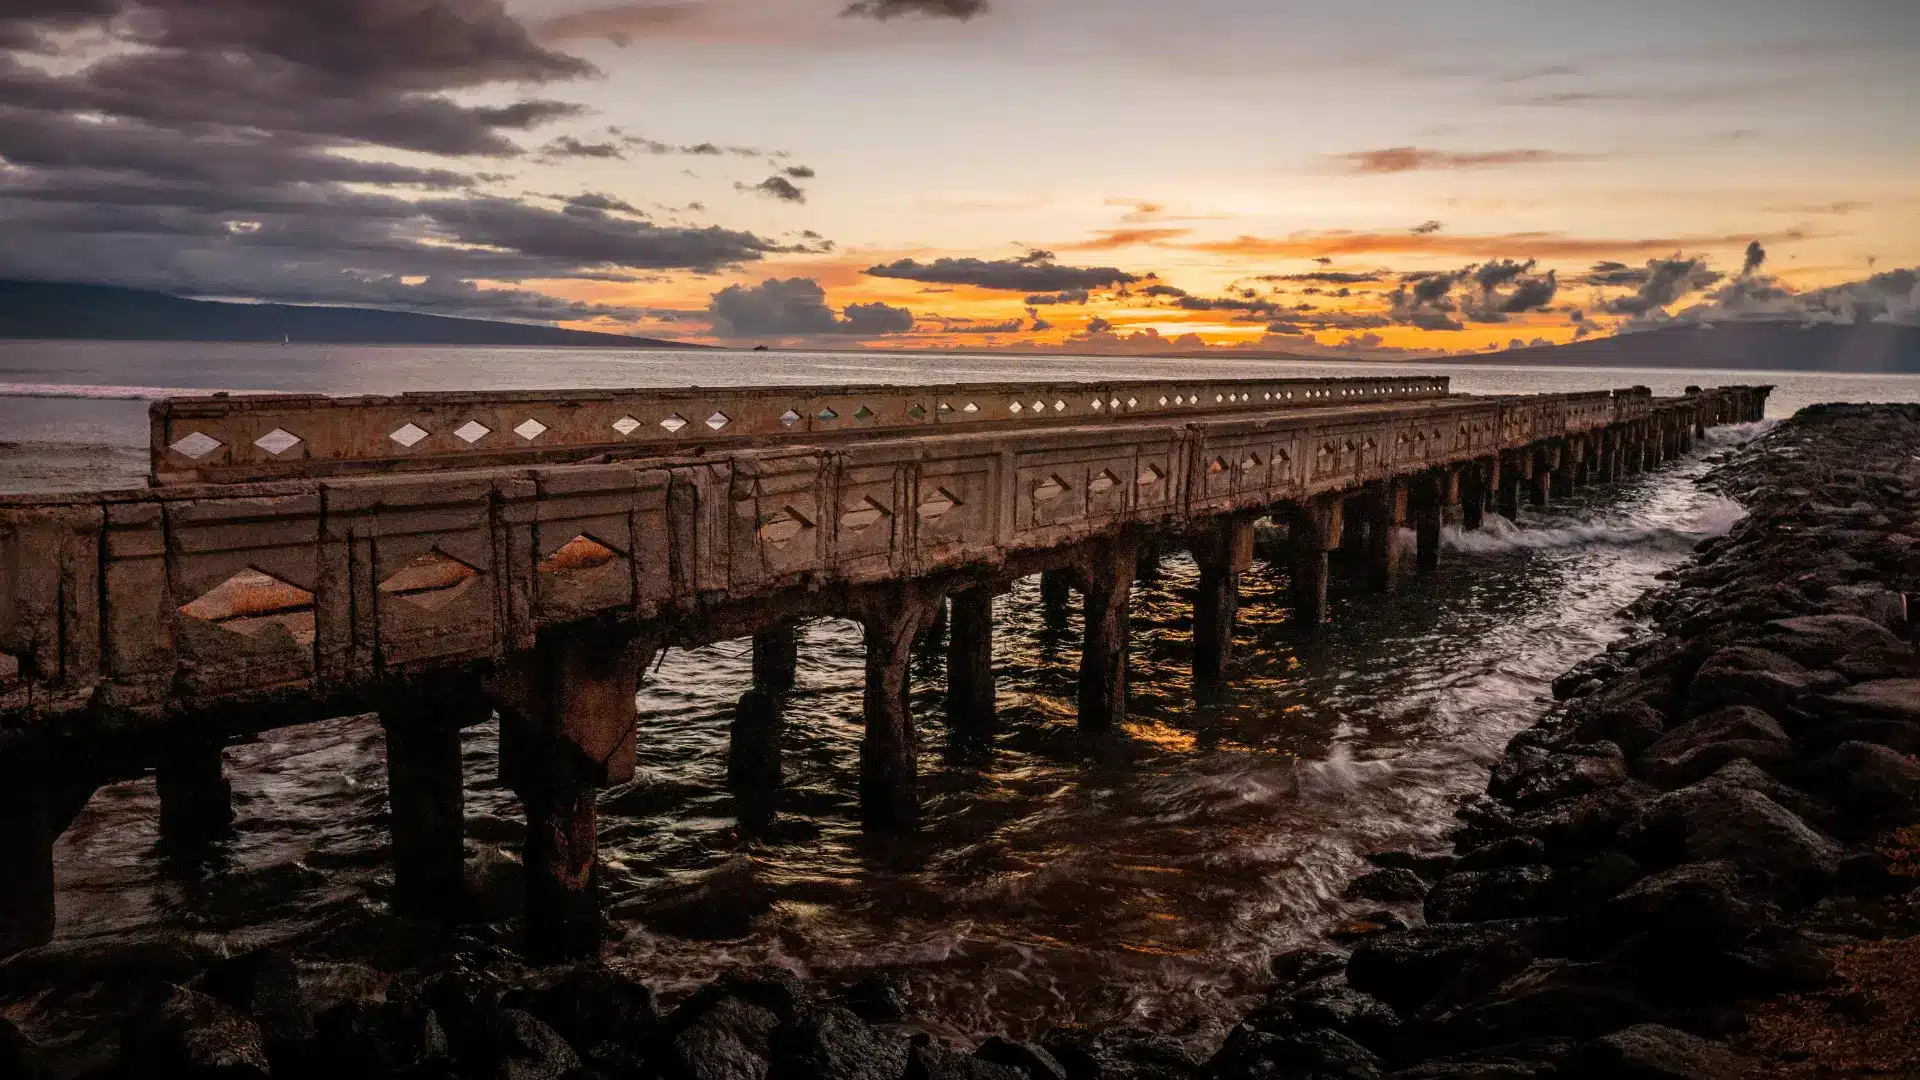 An old pier in Lahaina stretches out into the ocean at sunset